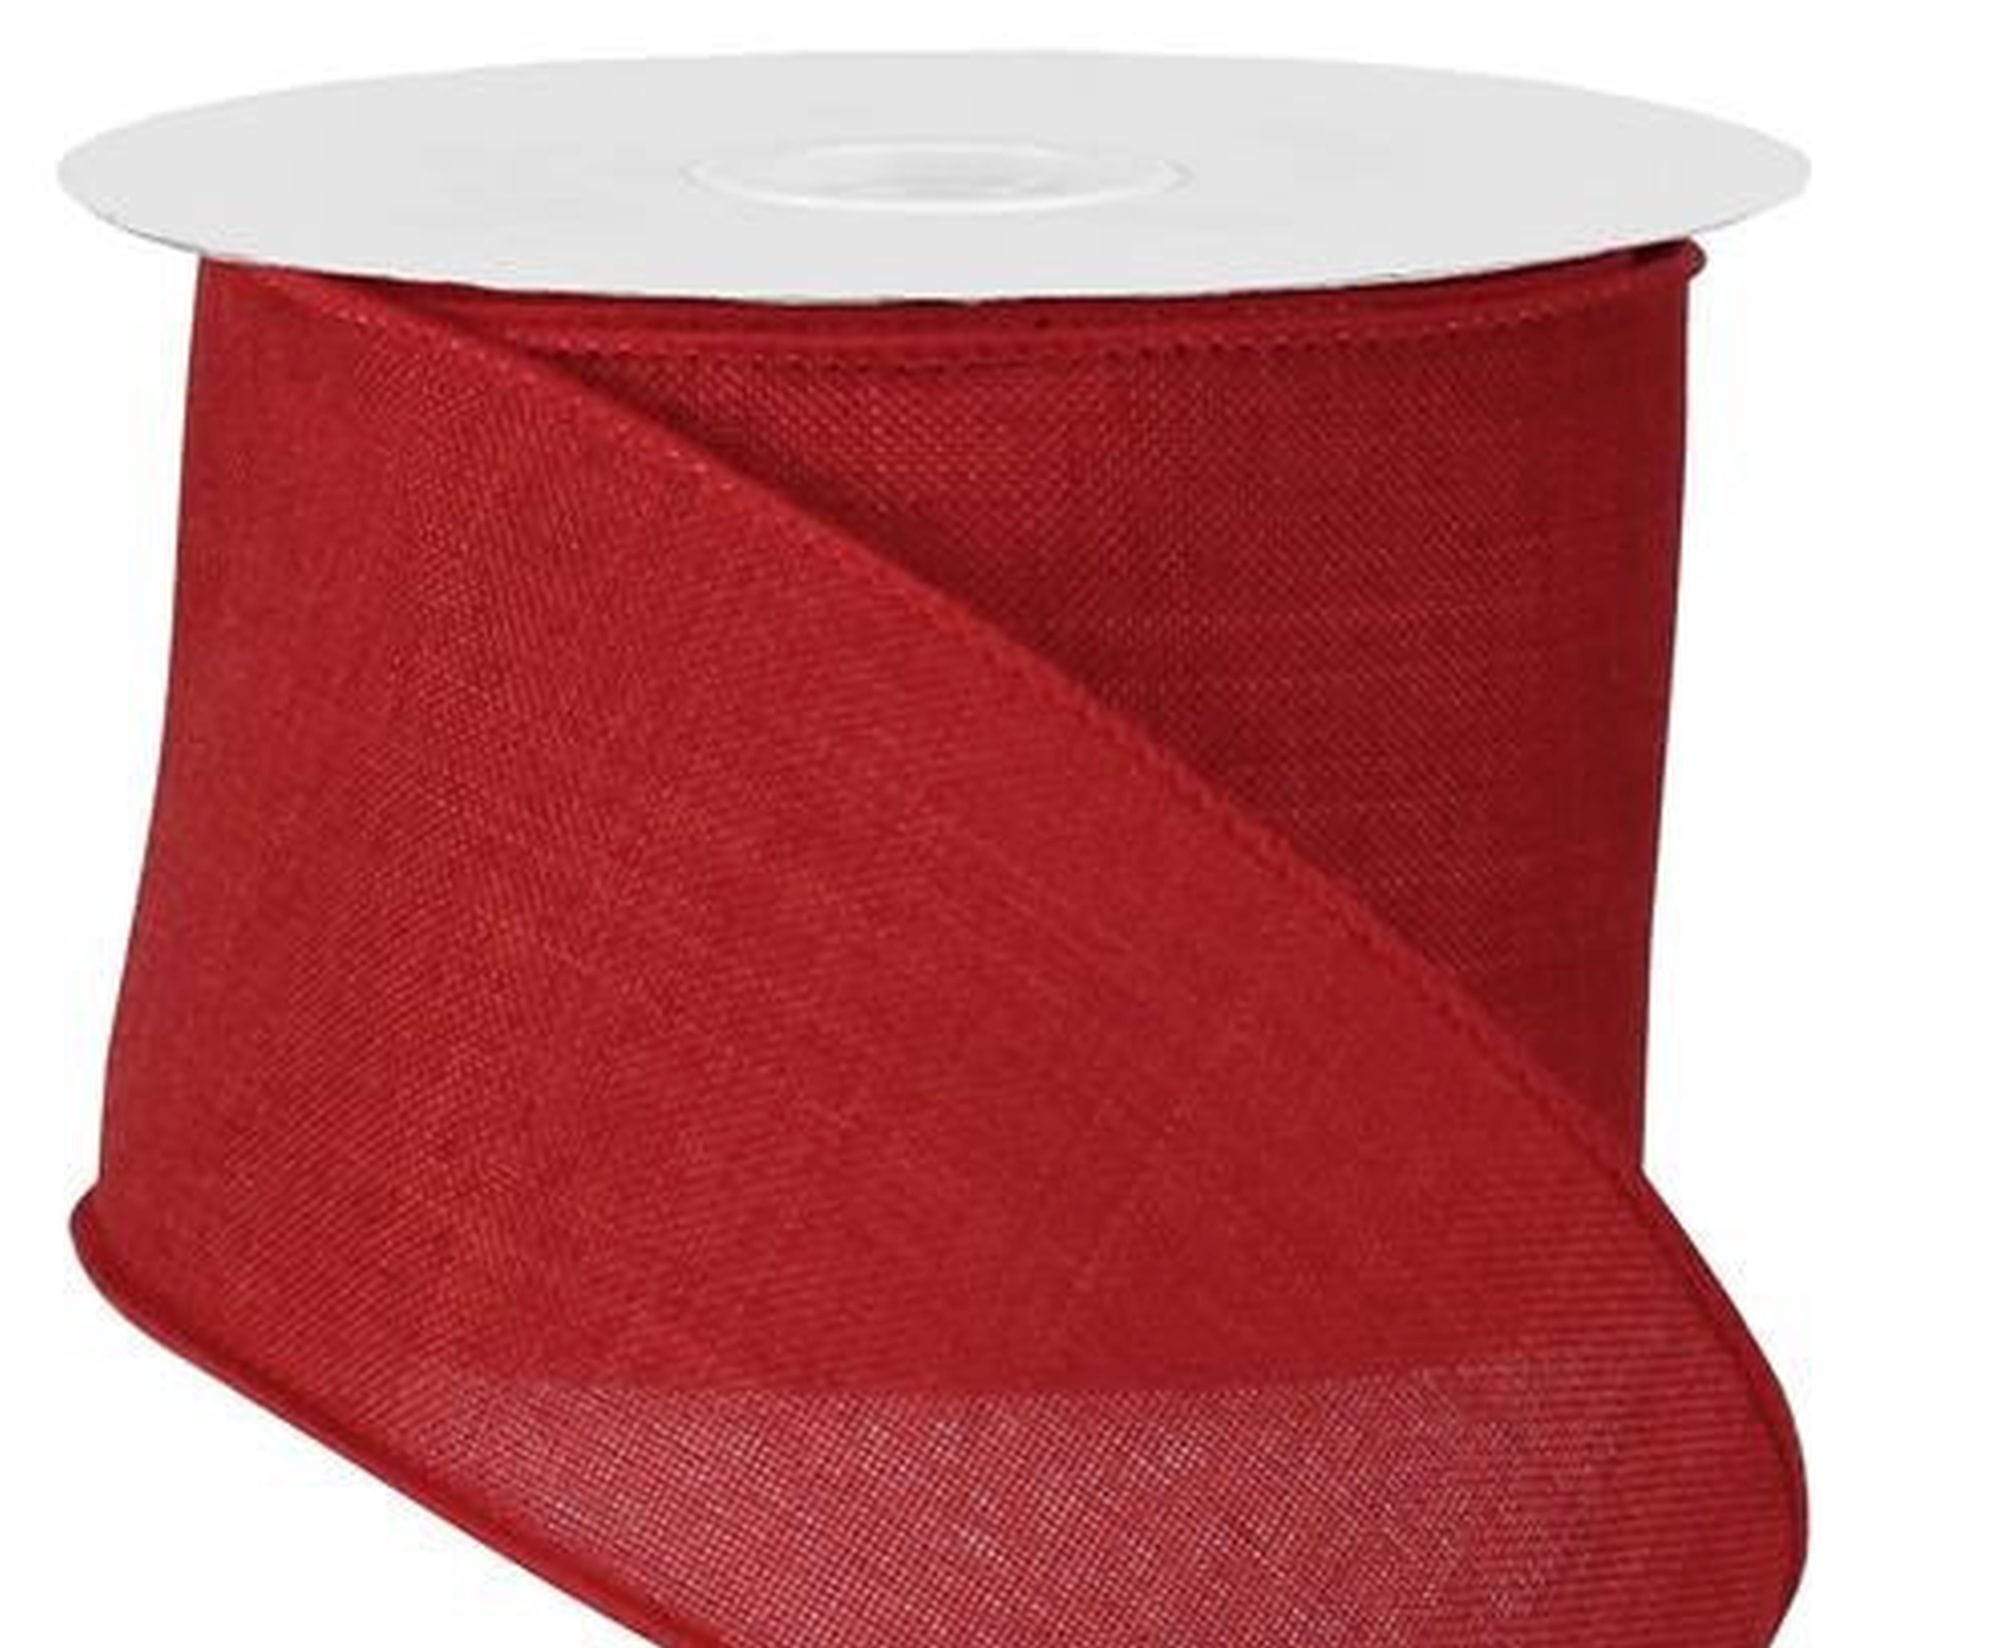 10 Yards Wired Summer Ribbon - 2.5 inch Red & White Gingham Ribbon wit –  Perpetual Ribbons